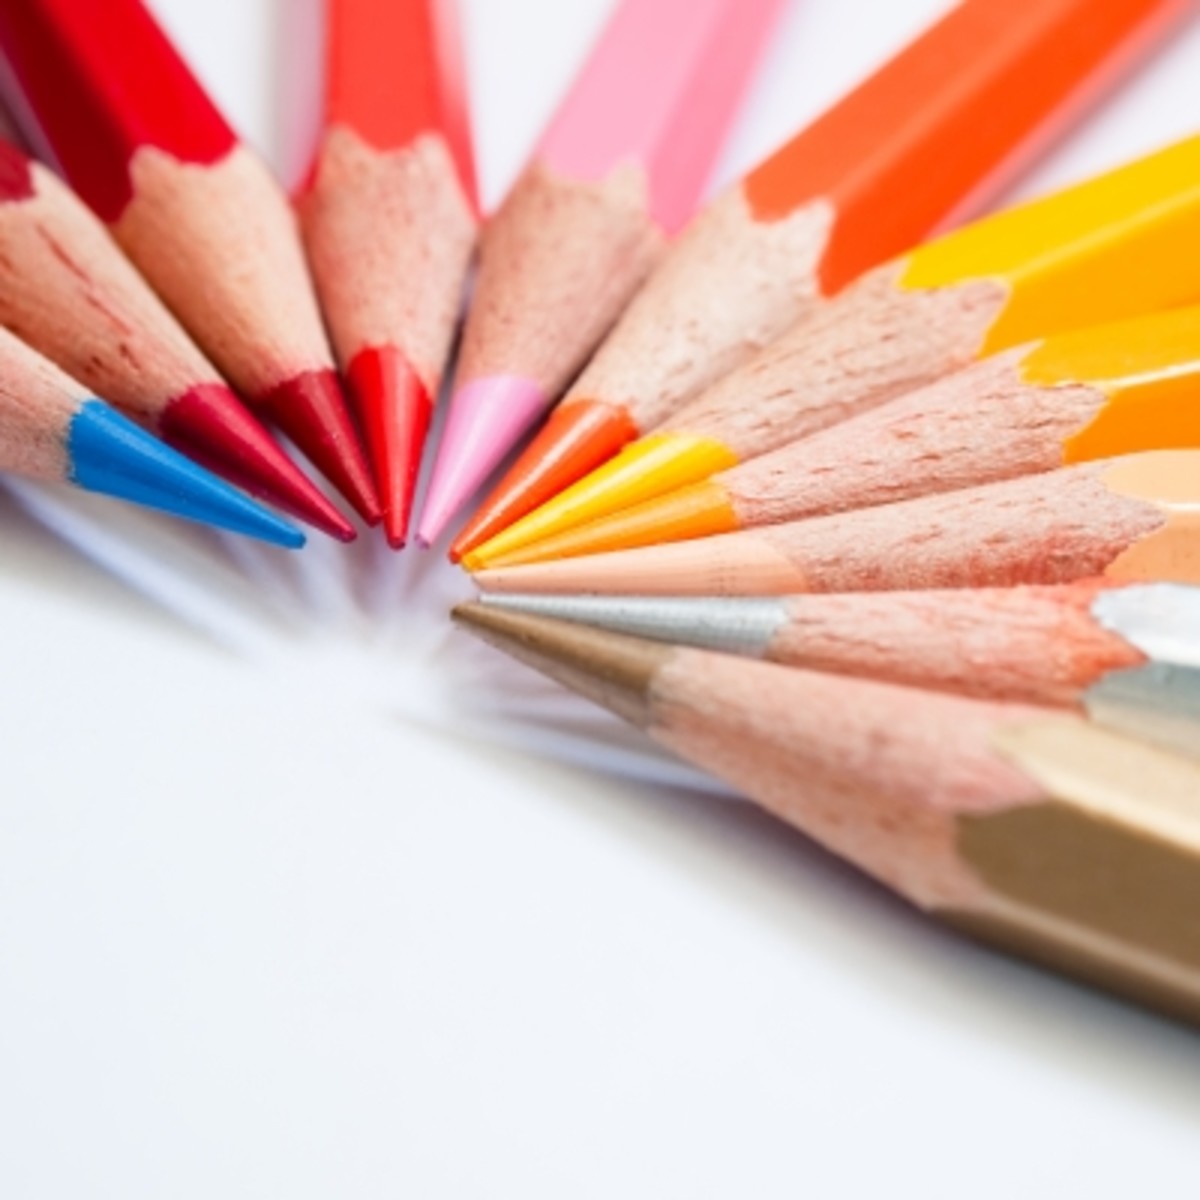 Cutting Costs On Arts And Crafts Supplies: How To Get More For Your Money